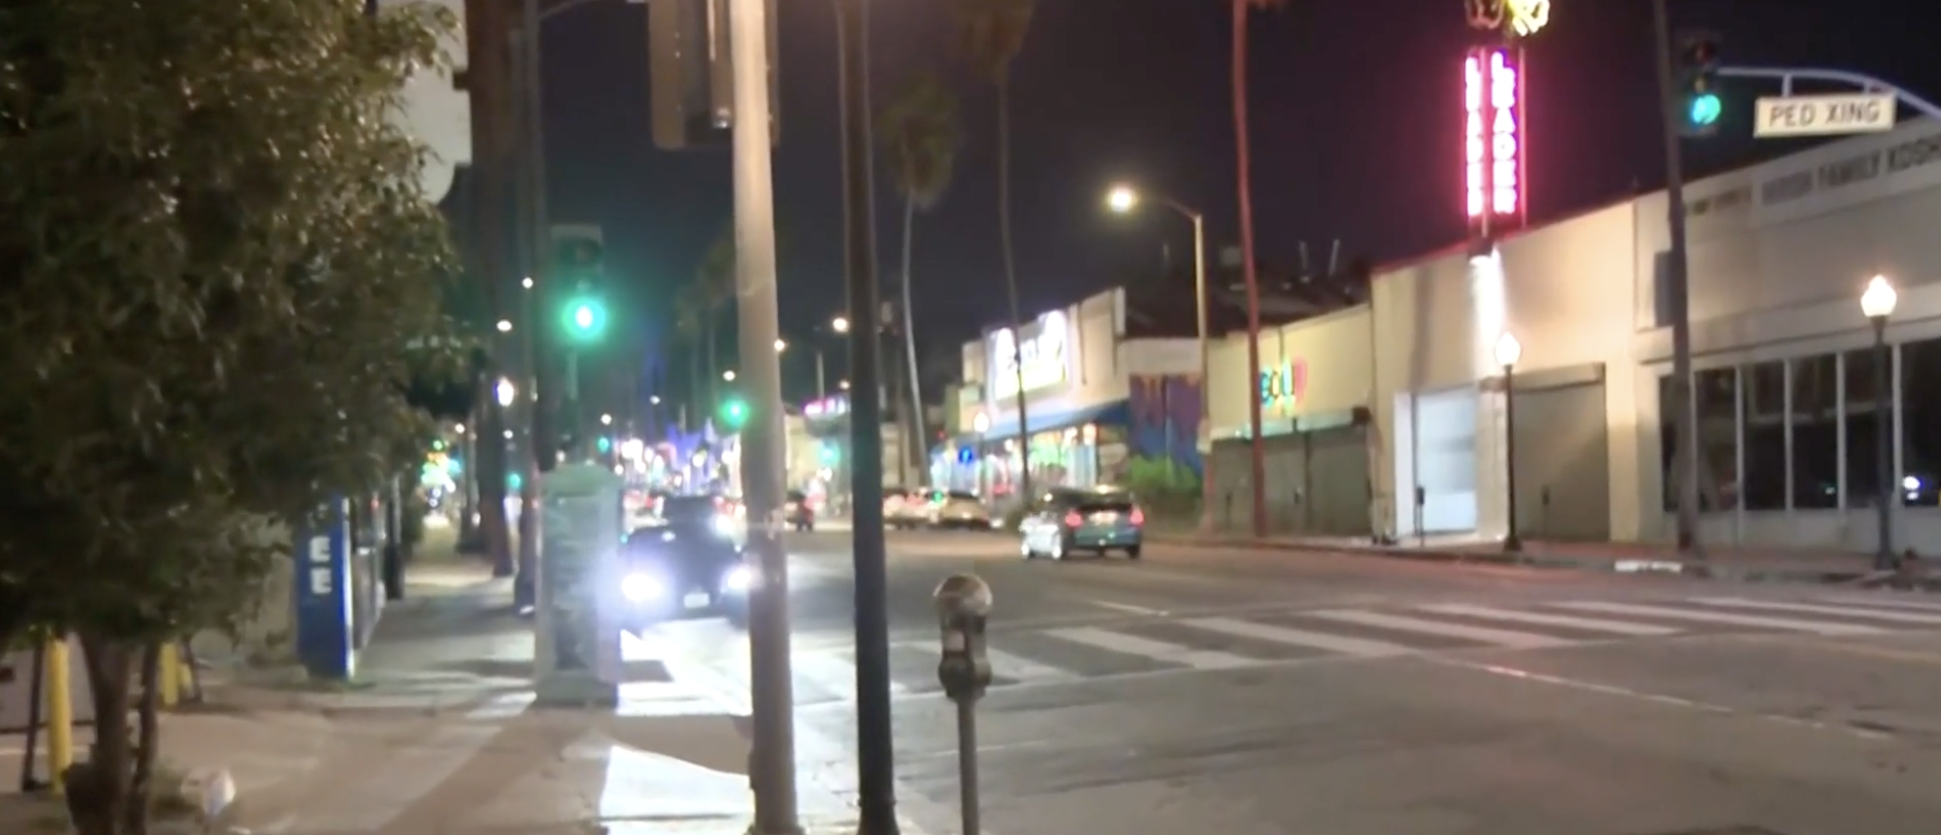 Los Angeles Police Investigate Possible Hate Crime After Someone ...